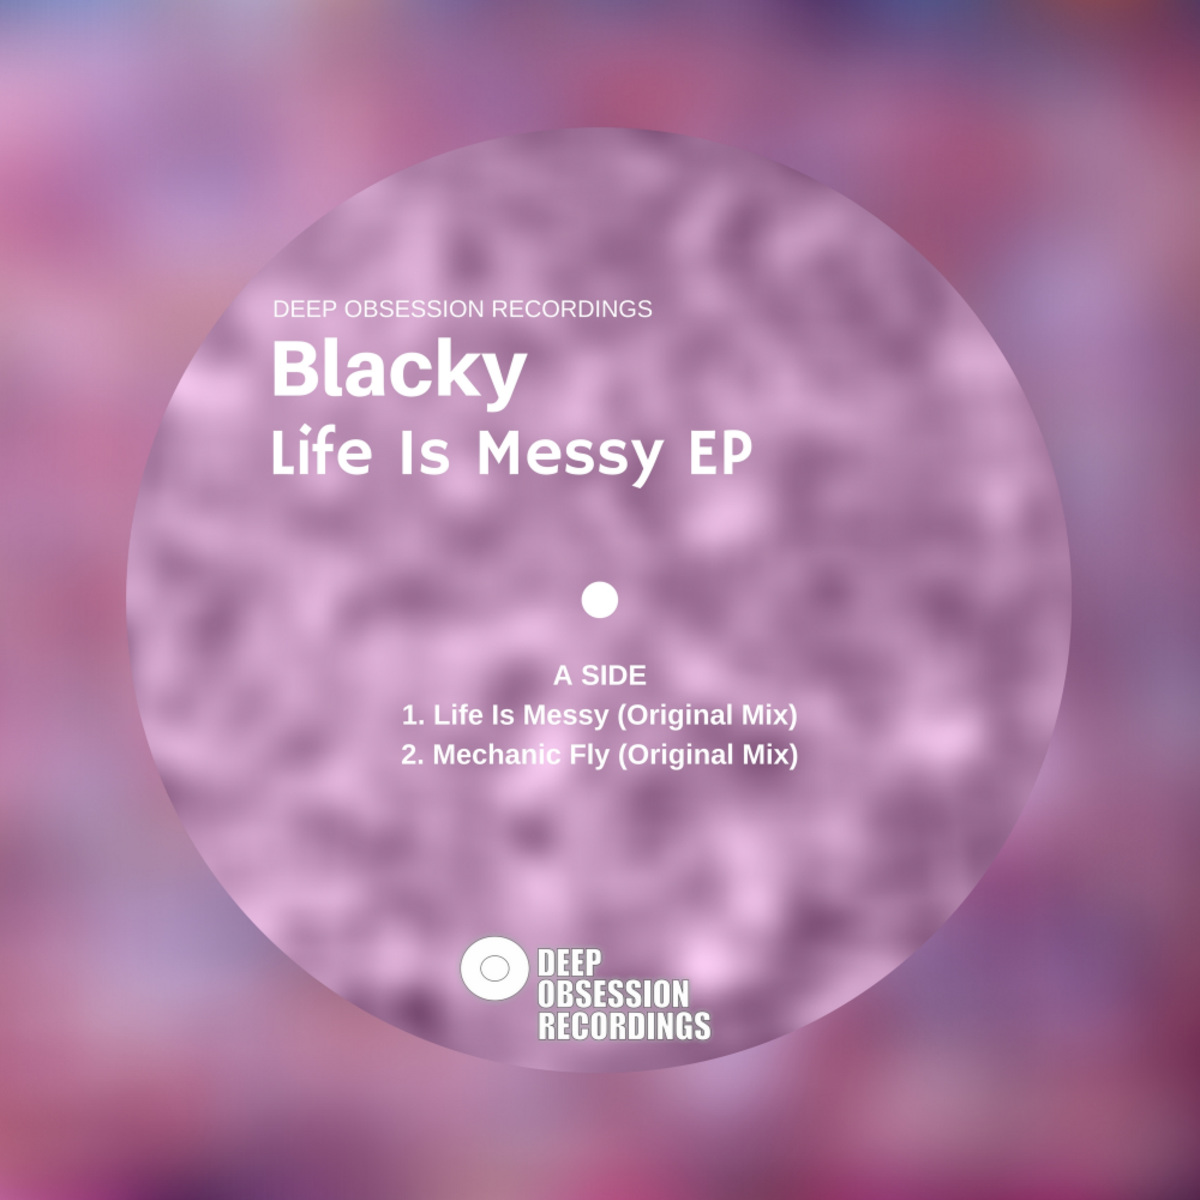 Blacky - Life Is Messy EP / Deep Obsession Recordings